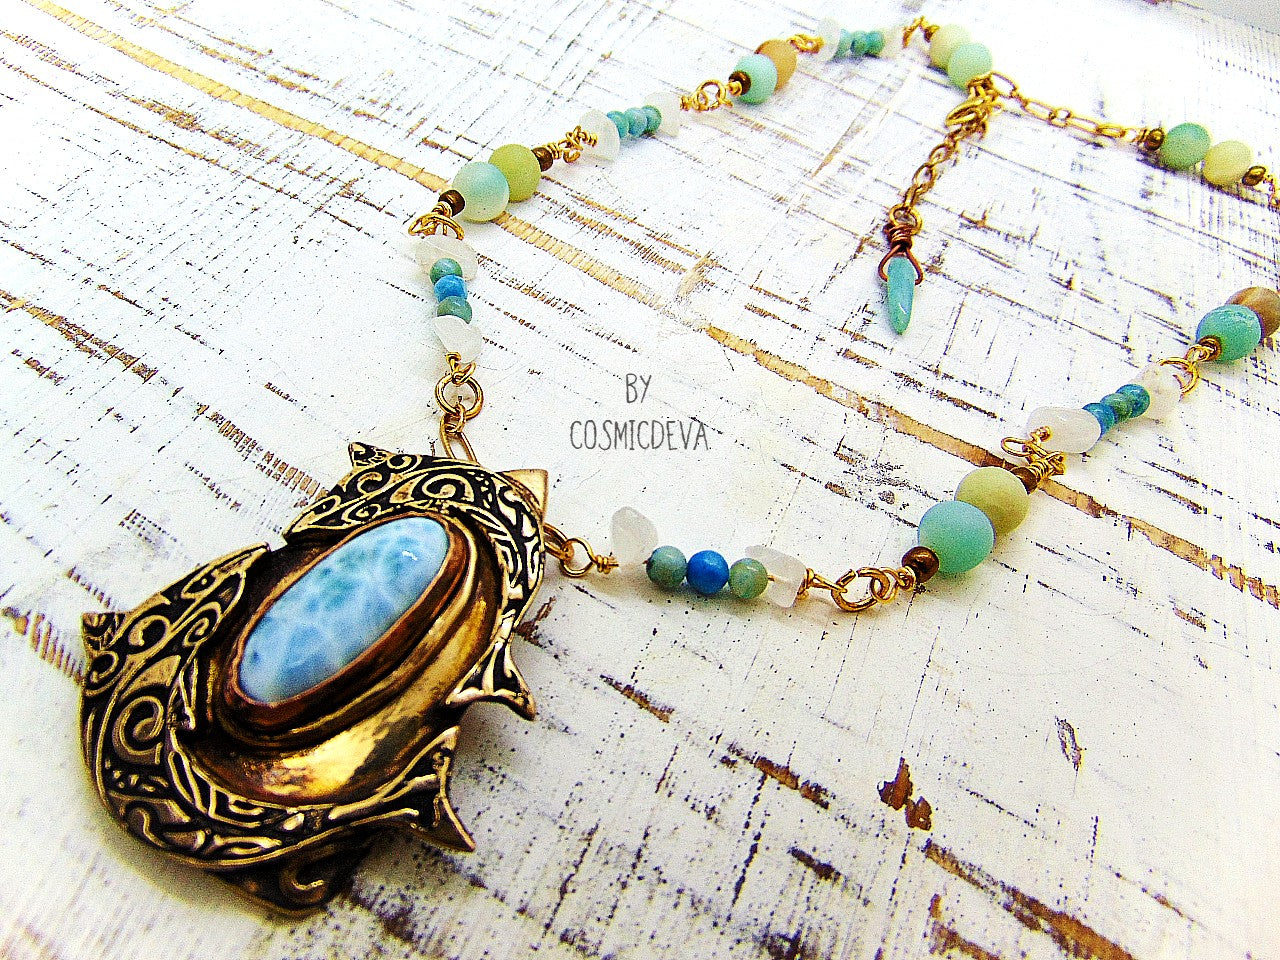 Bring harmony to your life with this beautiful Larimar Dancing Dolphins Bronze Necklace. Handcrafted with solid gold bronze and adorned with a dazzling aqua larimar gemstone, this one-of-a-kind pendant evokes the timeless wisdom of Atlantis and the healing power of dolphins. Finished with aqua jasper, clear quartz and amazonite gemstone beads, this necklace is a stylish and meaningful choice!